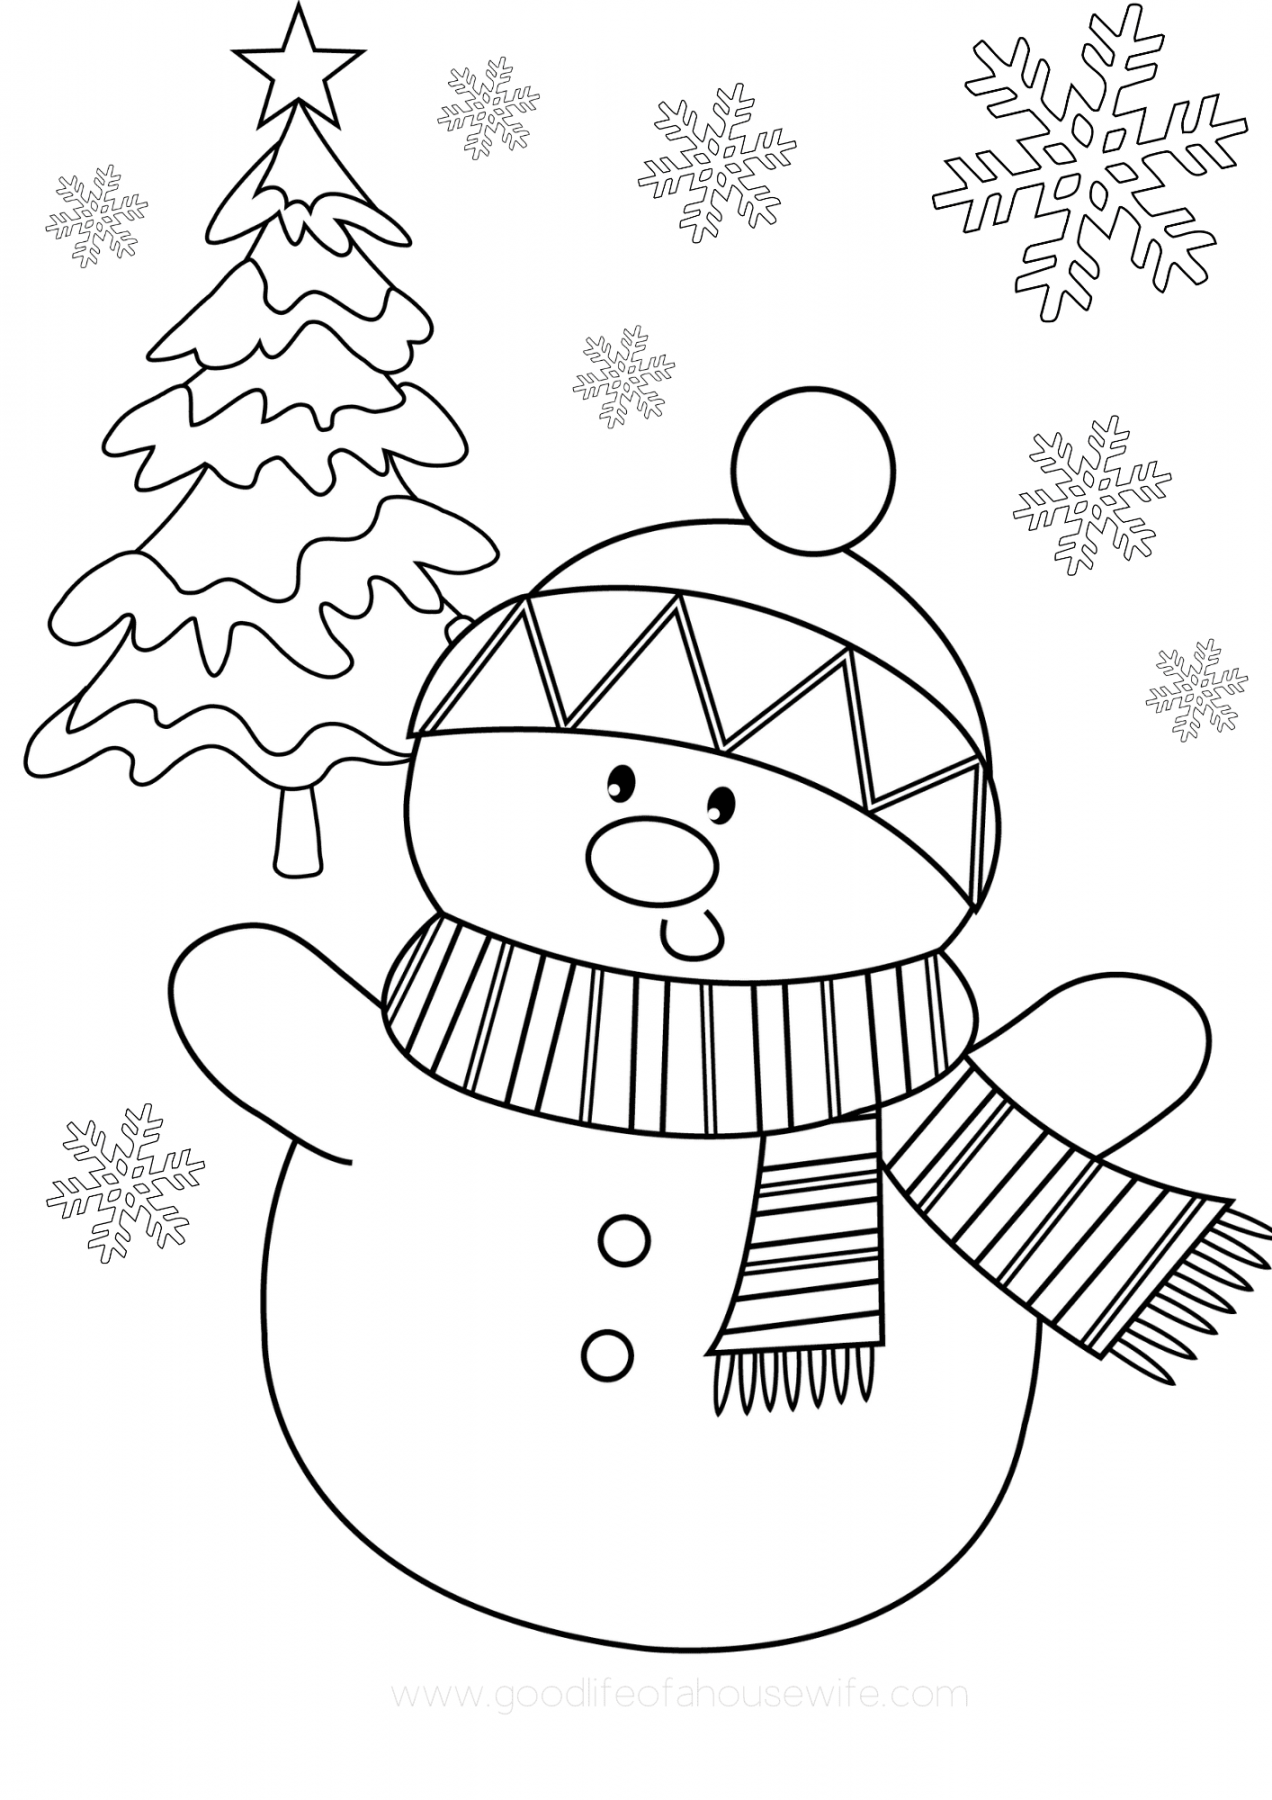 Free Printable Coloring Pages of Christmas - Printable - Free Printable Christmas Coloring Pages - Good Life of a Housewife